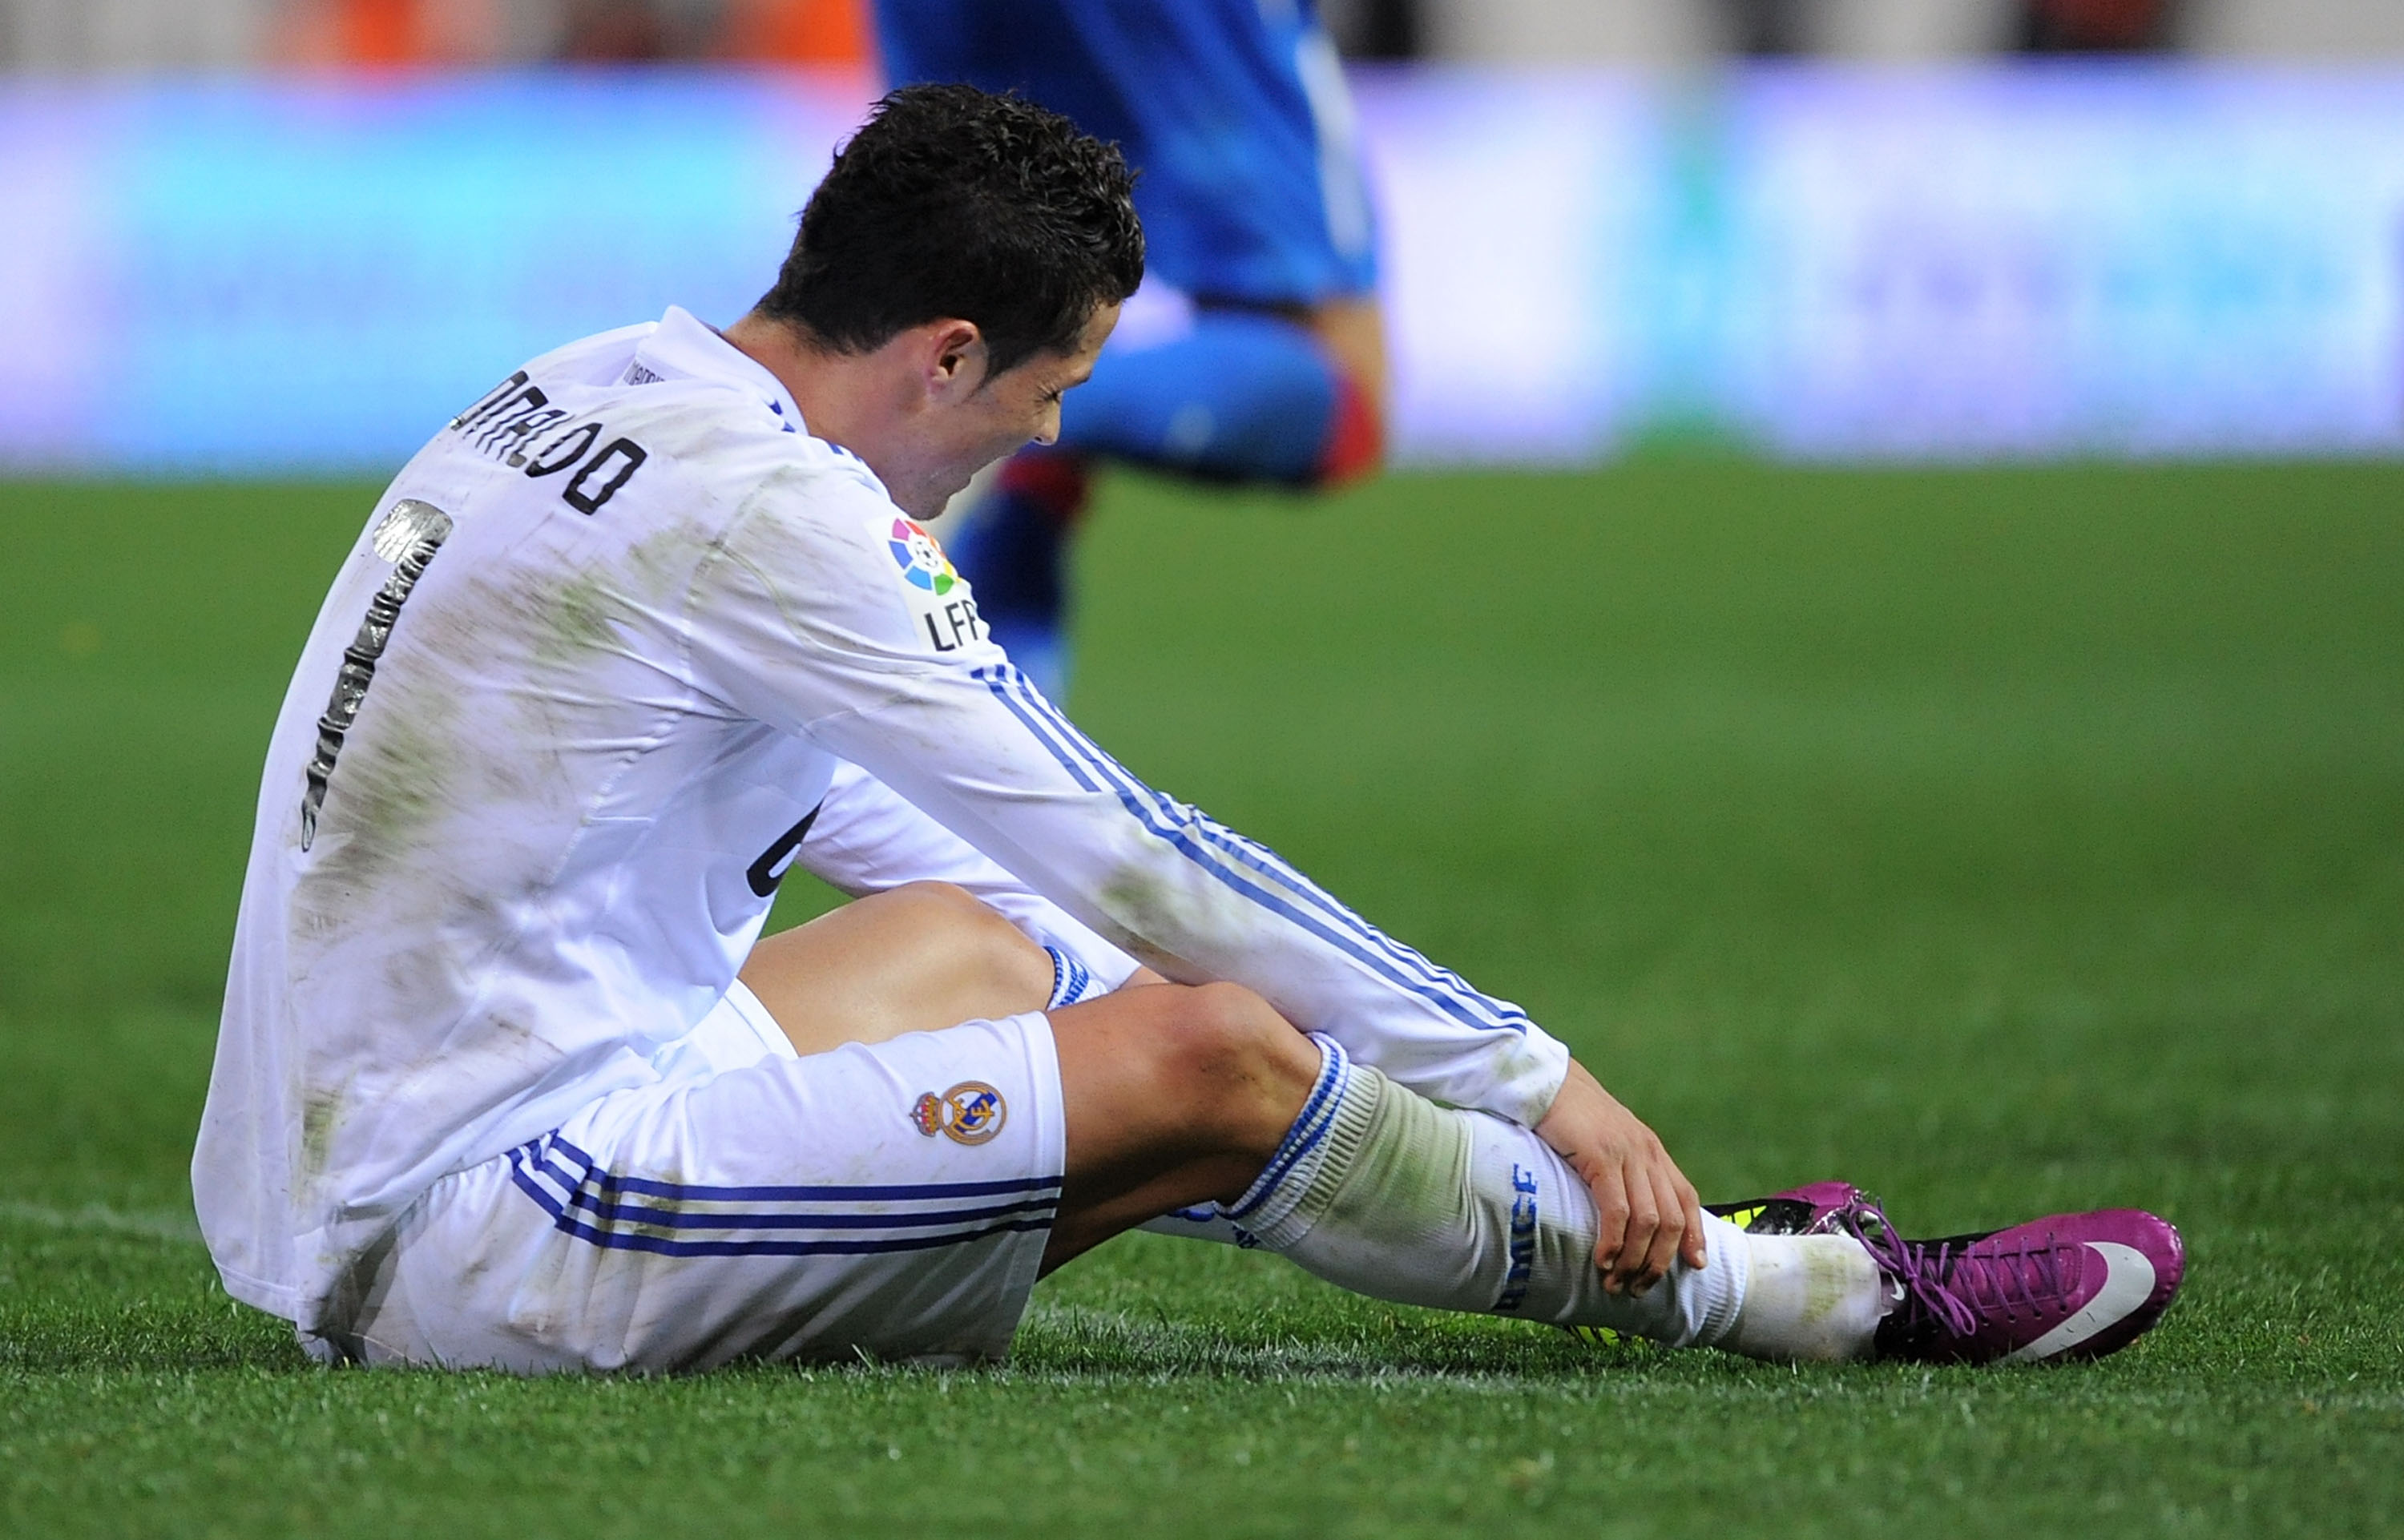 MADRID, SPAIN - MARCH 19:  Cristiano Ronaldo of Real Madrid reacts after taking a fall during the La Liga match between Atletico Madrid and Real Madrid at Vicente Calderon Stadium on March 19, 2011 in Madrid, Spain.  (Photo by Denis Doyle/Getty Images)